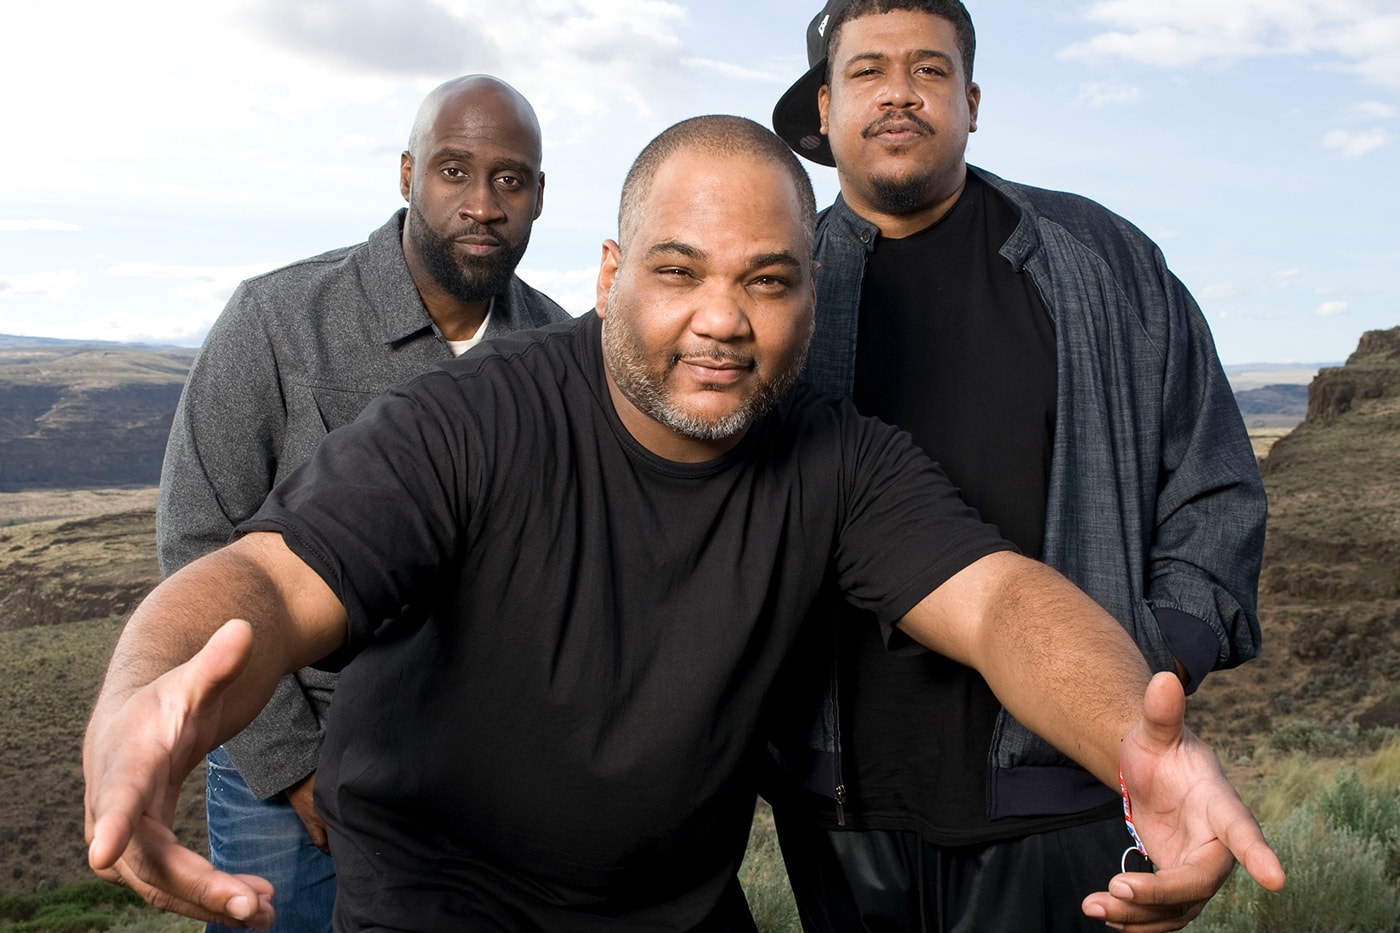 Reservoir Working to Put De La Soul Music Streaming services tommy boy records tom silverman